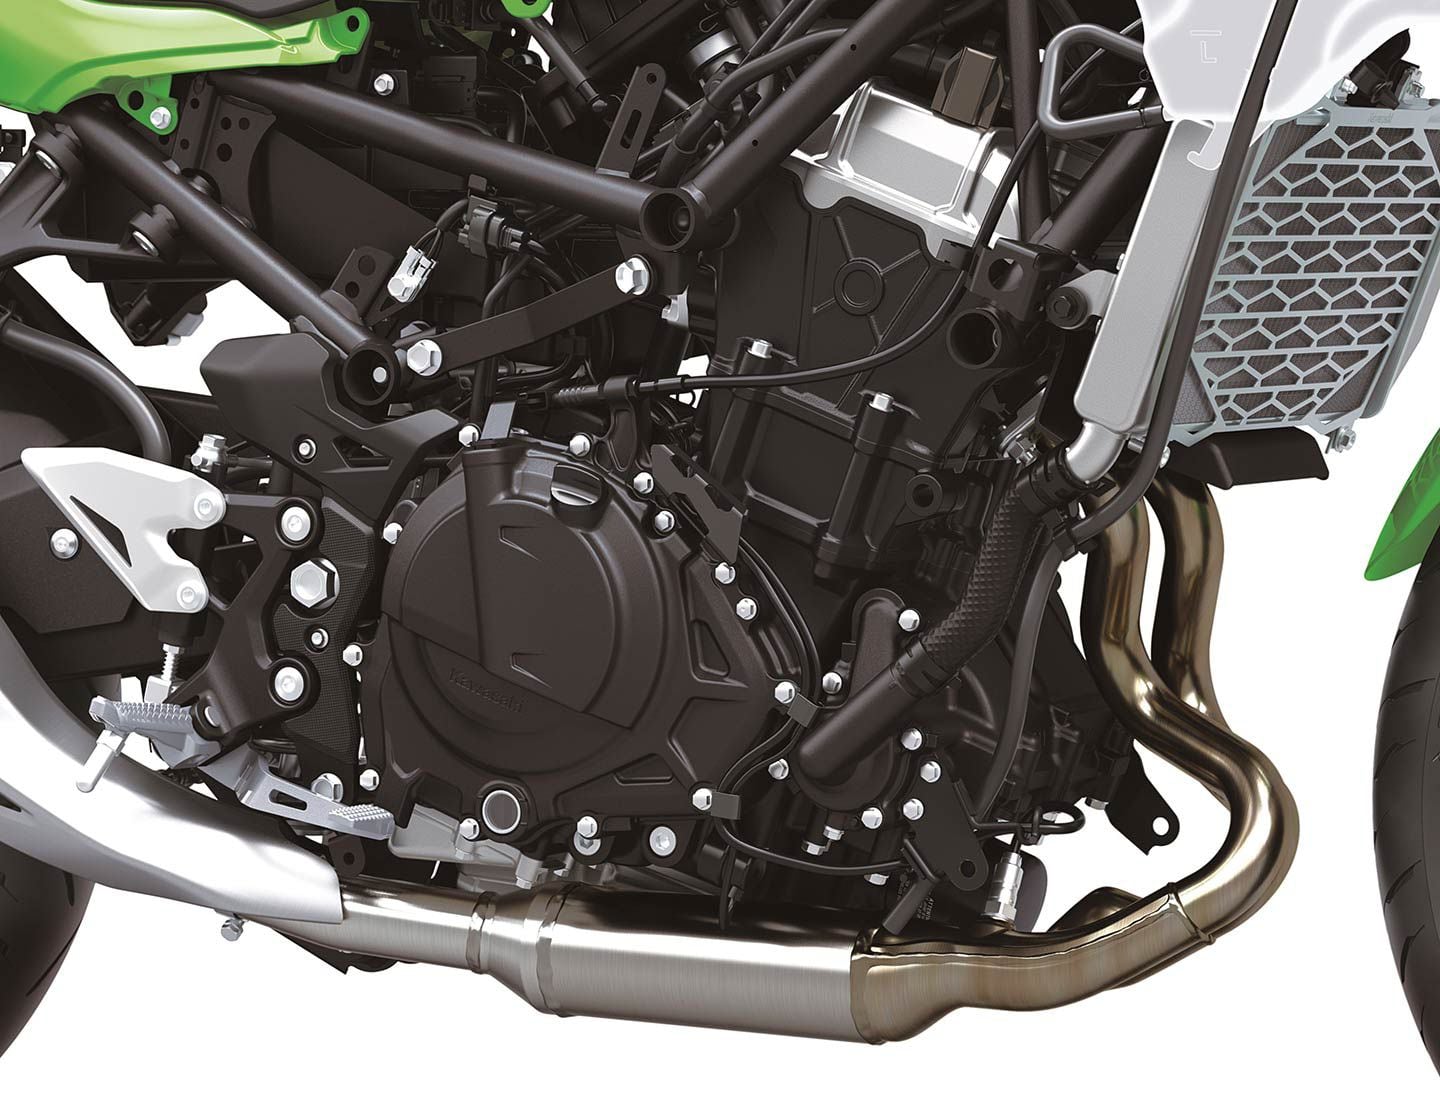 Kawasaki increased stroke and updated several components to create the new 451cc parallel-twin engine.